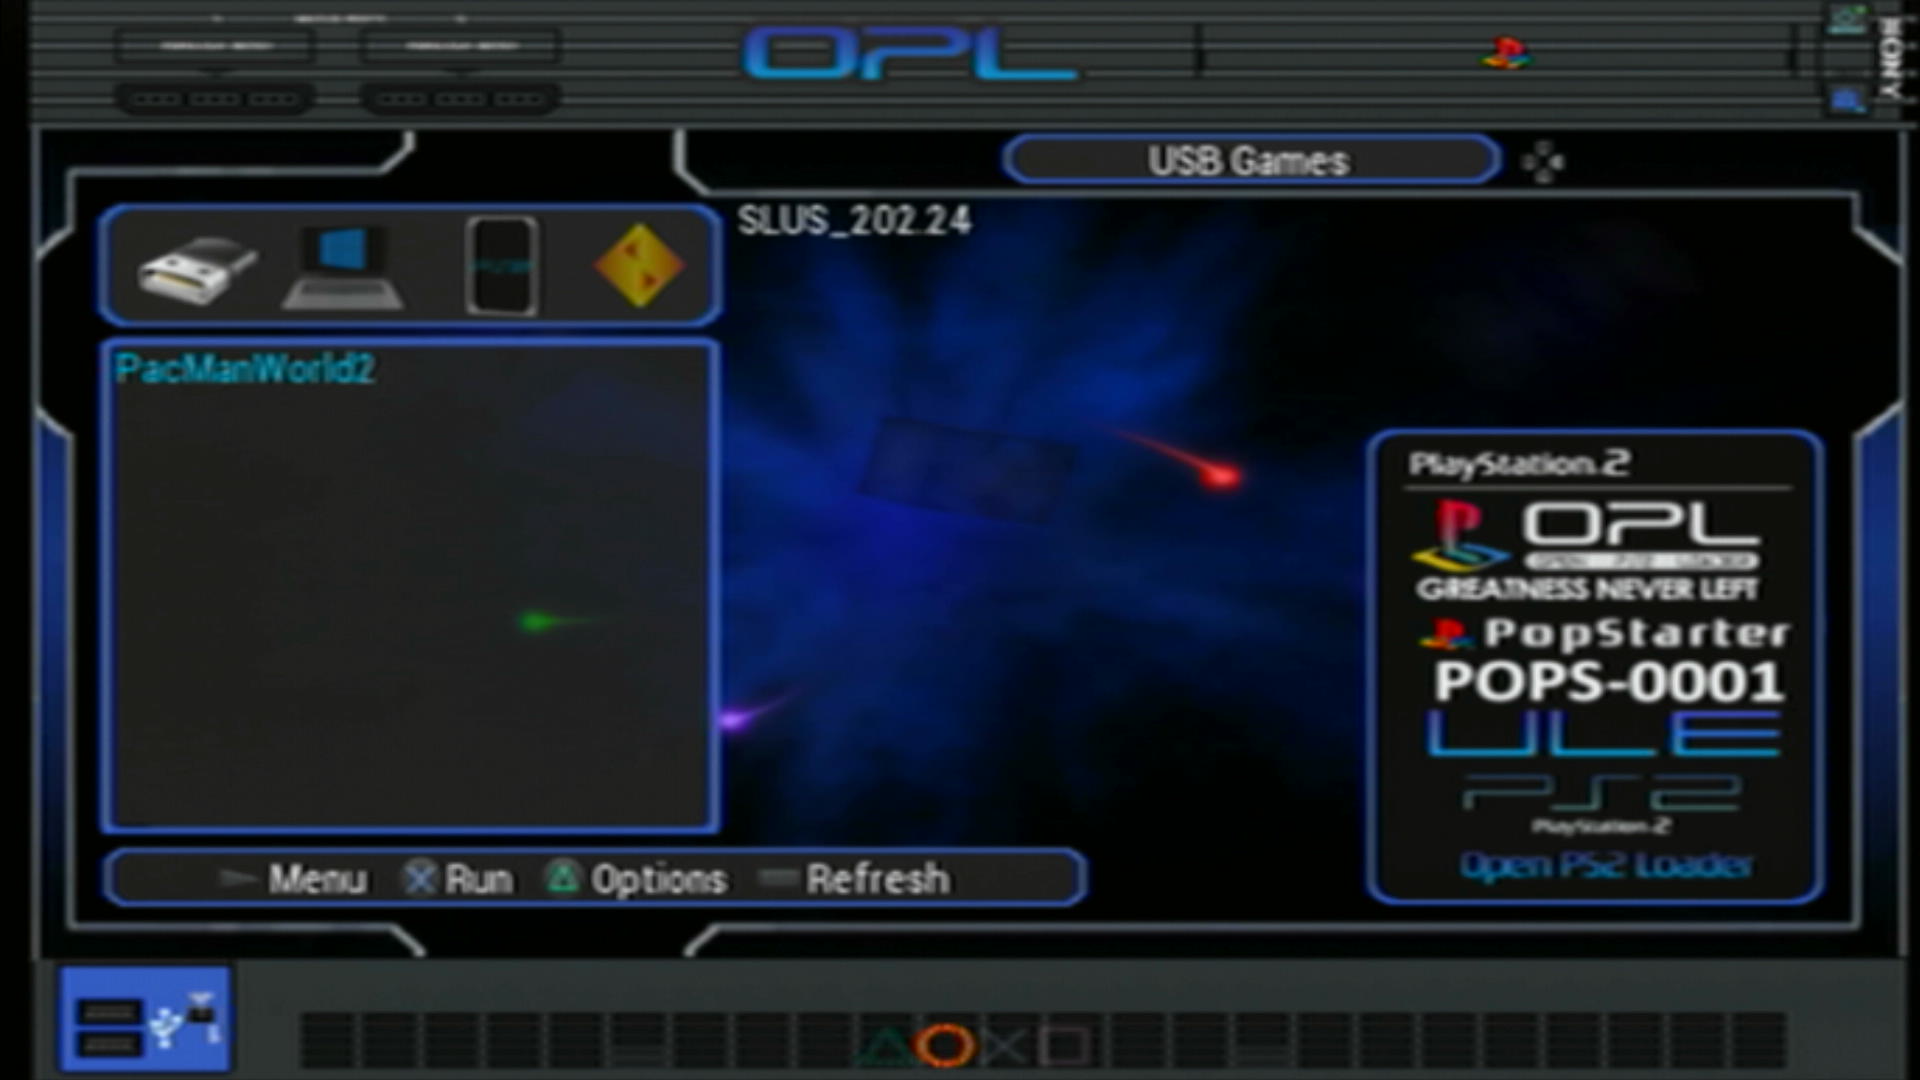 How to Install OPL Themes on a Playstation 2! 